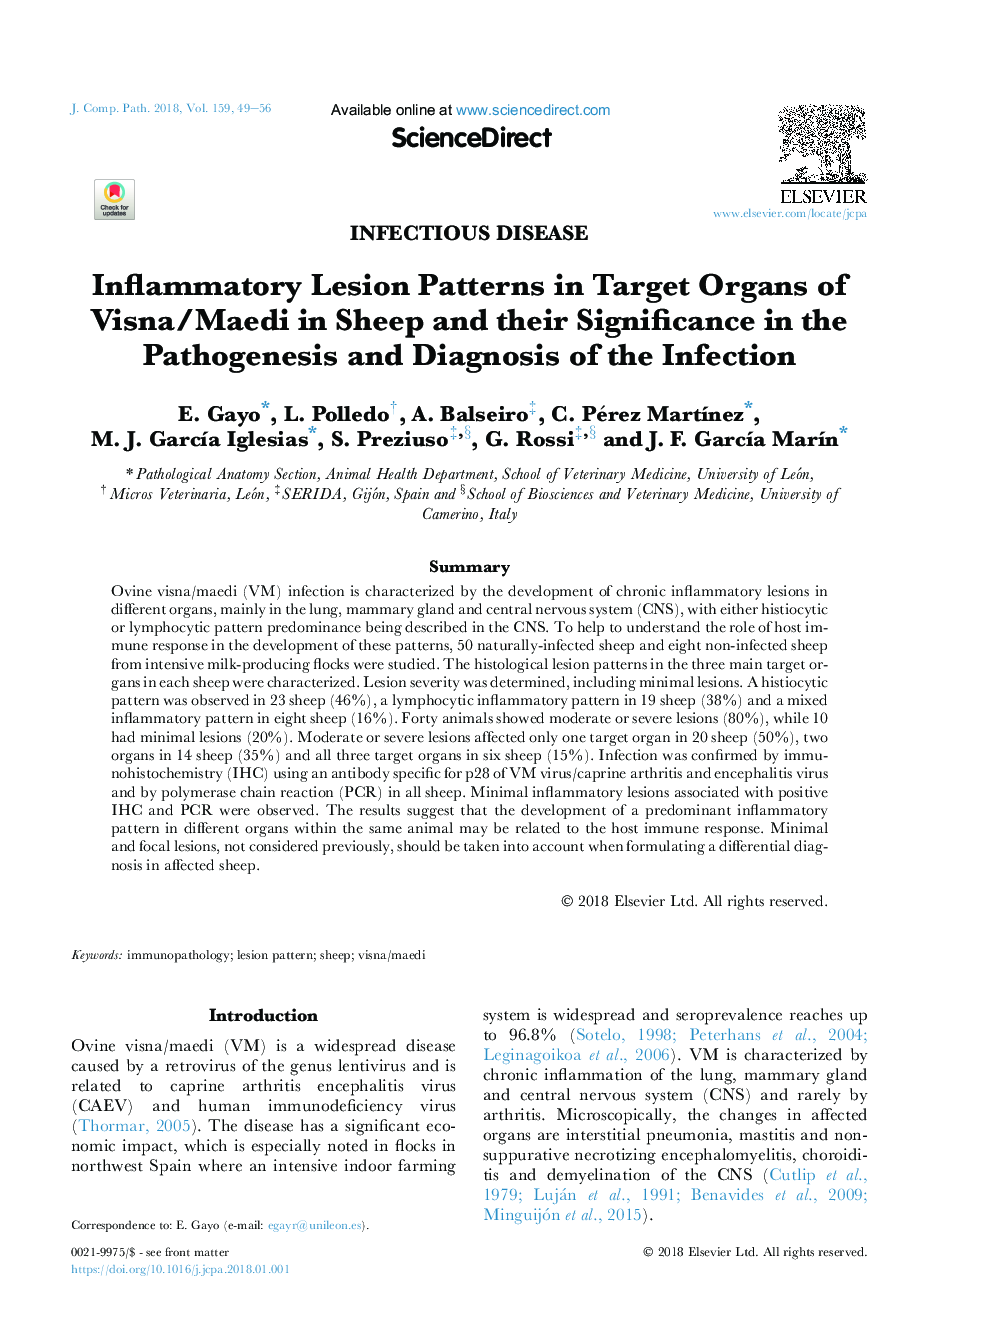 Inflammatory Lesion Patterns in Target Organs of Visna/Maedi in Sheep and their Significance in the Pathogenesis and Diagnosis of the Infection